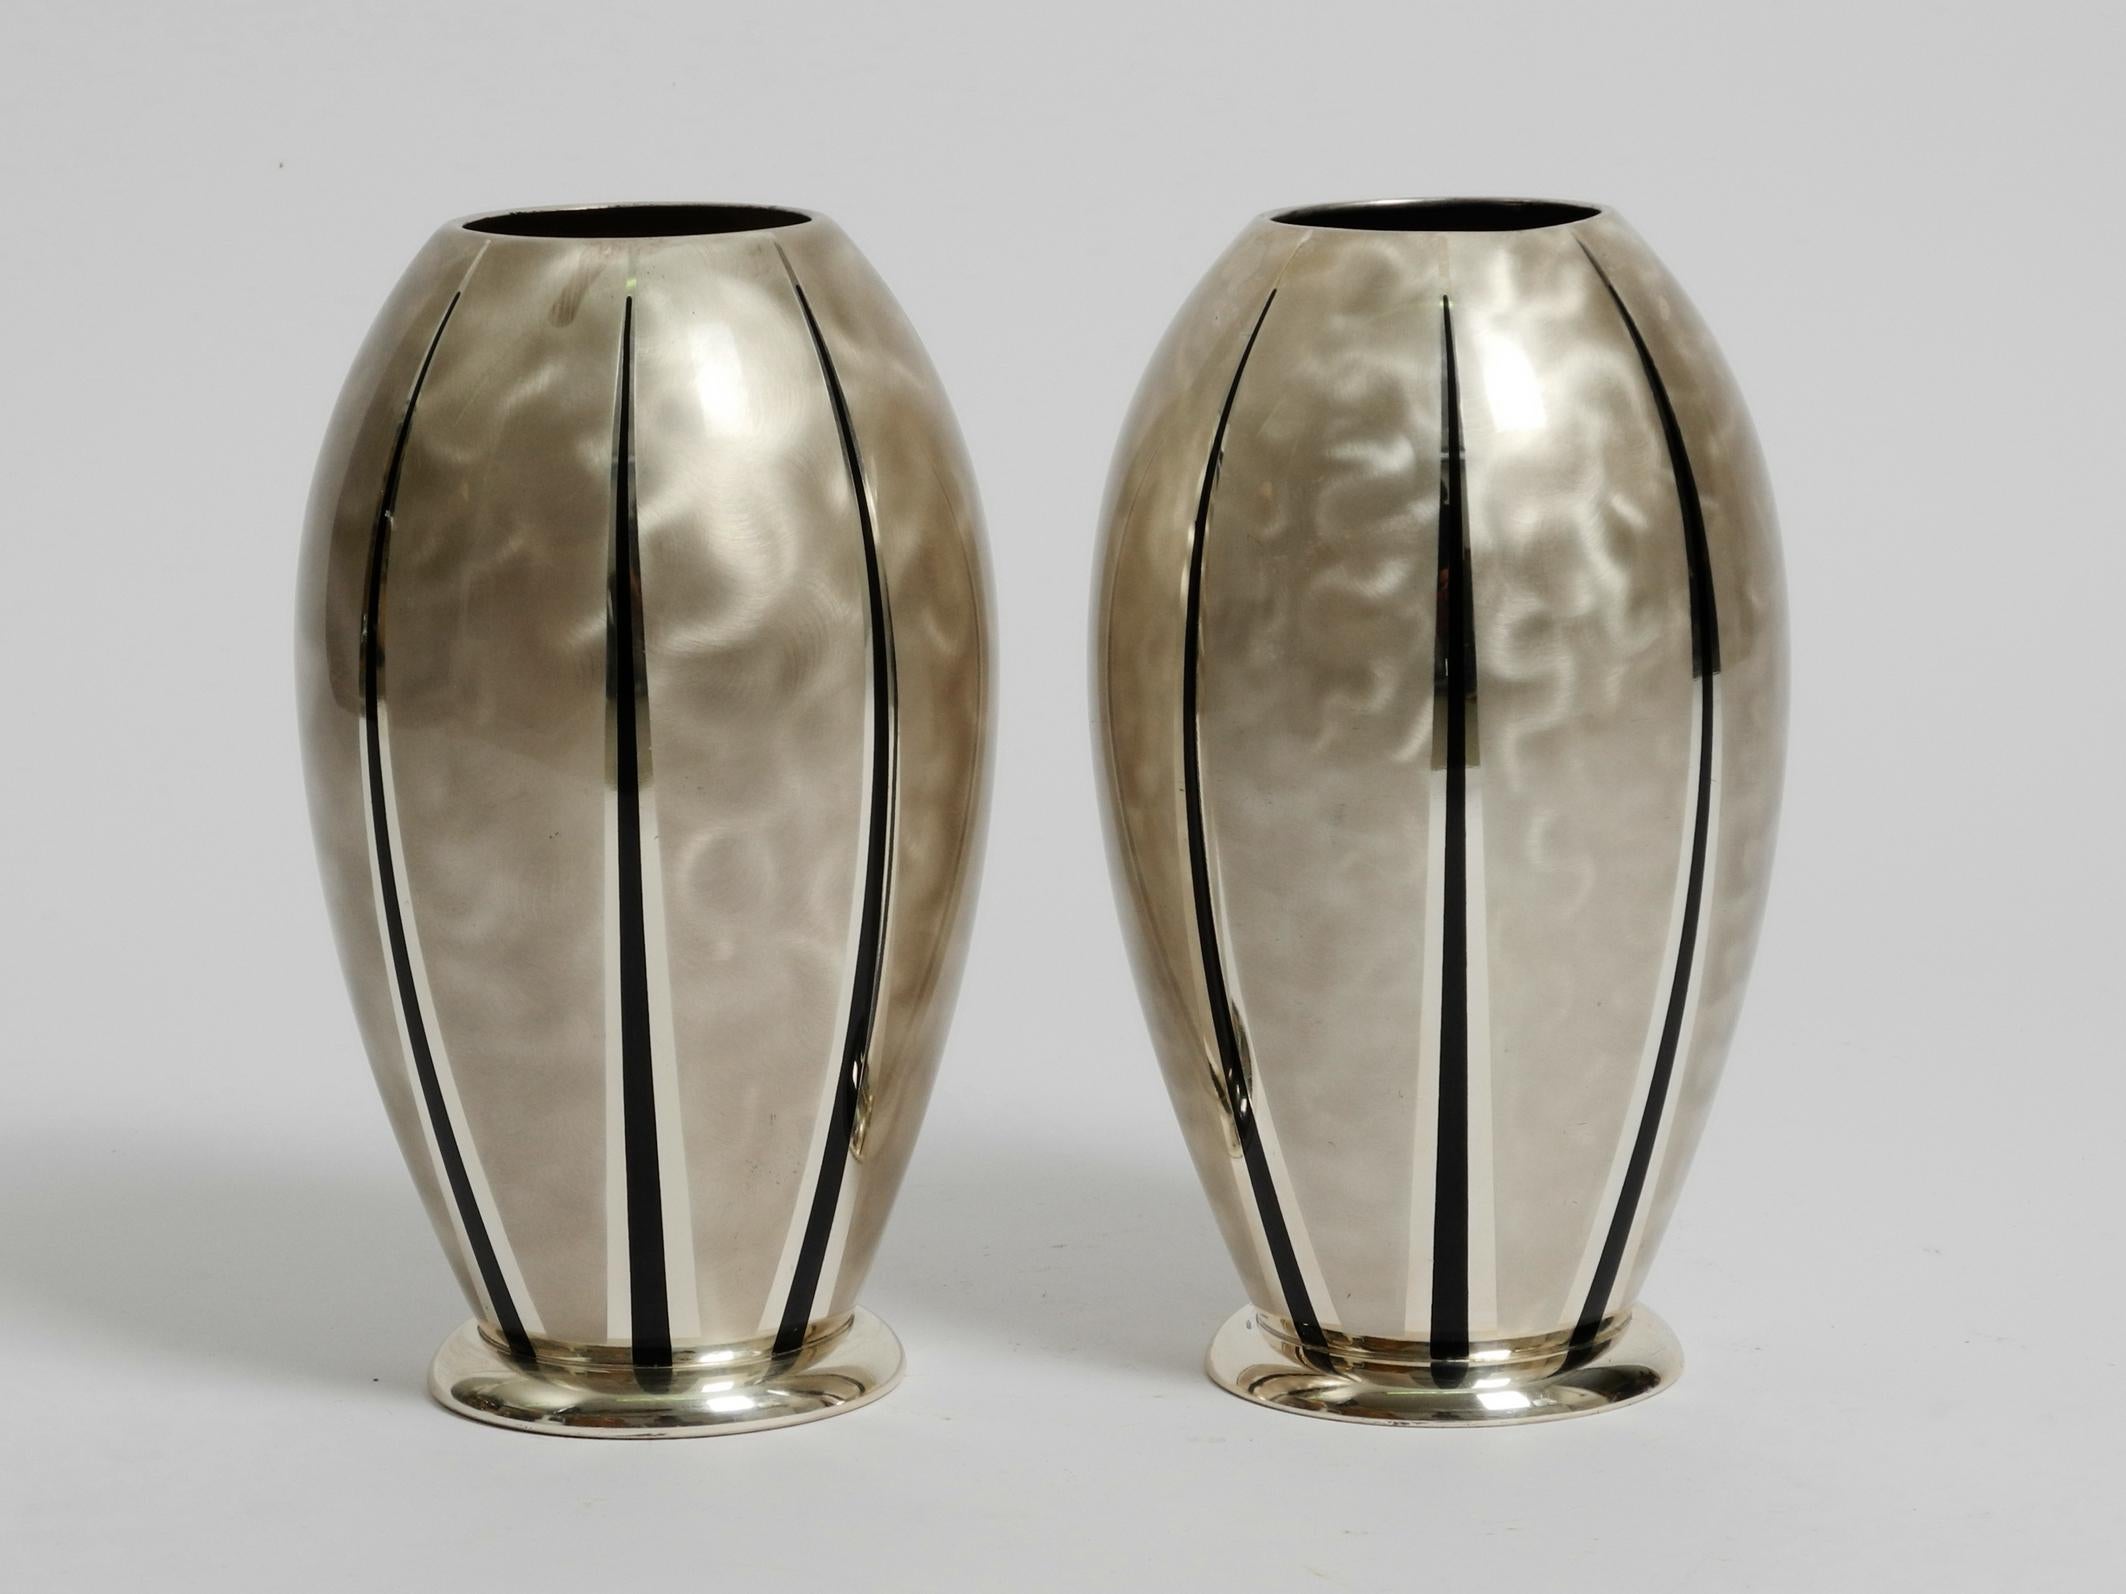 Pair of Mid Century Modern WMF Ikora table vases made of silver-plated brass 8